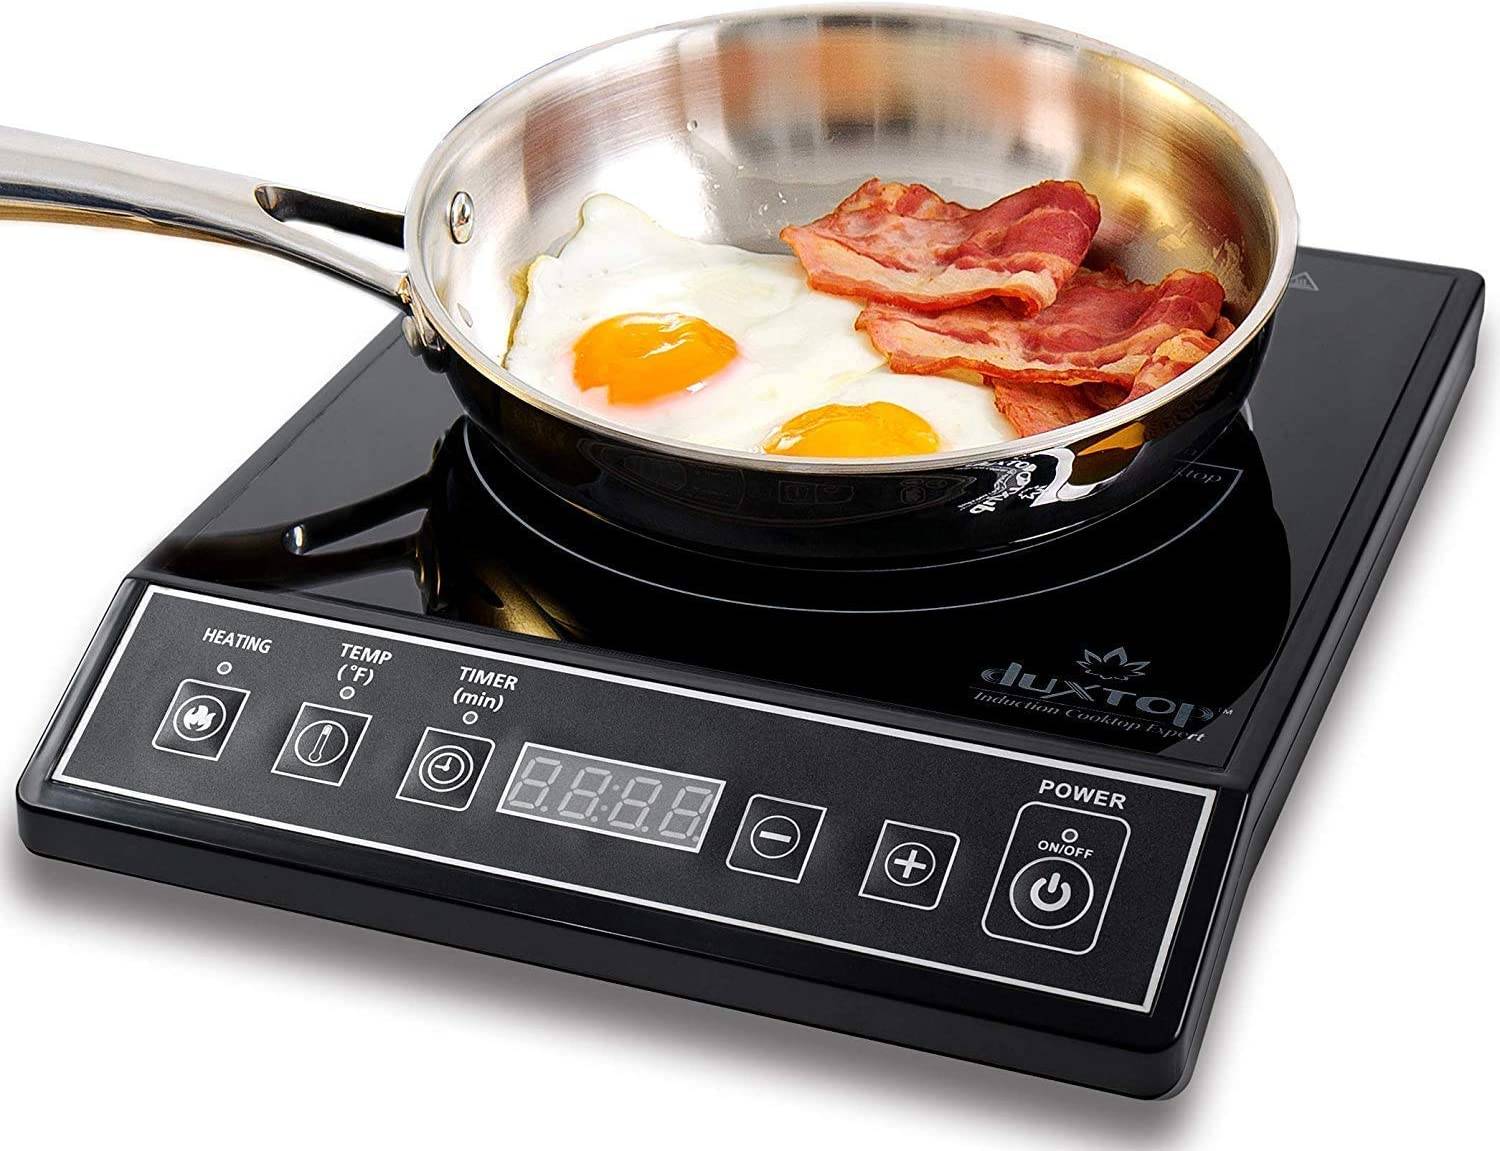 Duxtop 1800w Portable Induction Cooktop 9100MC, Works